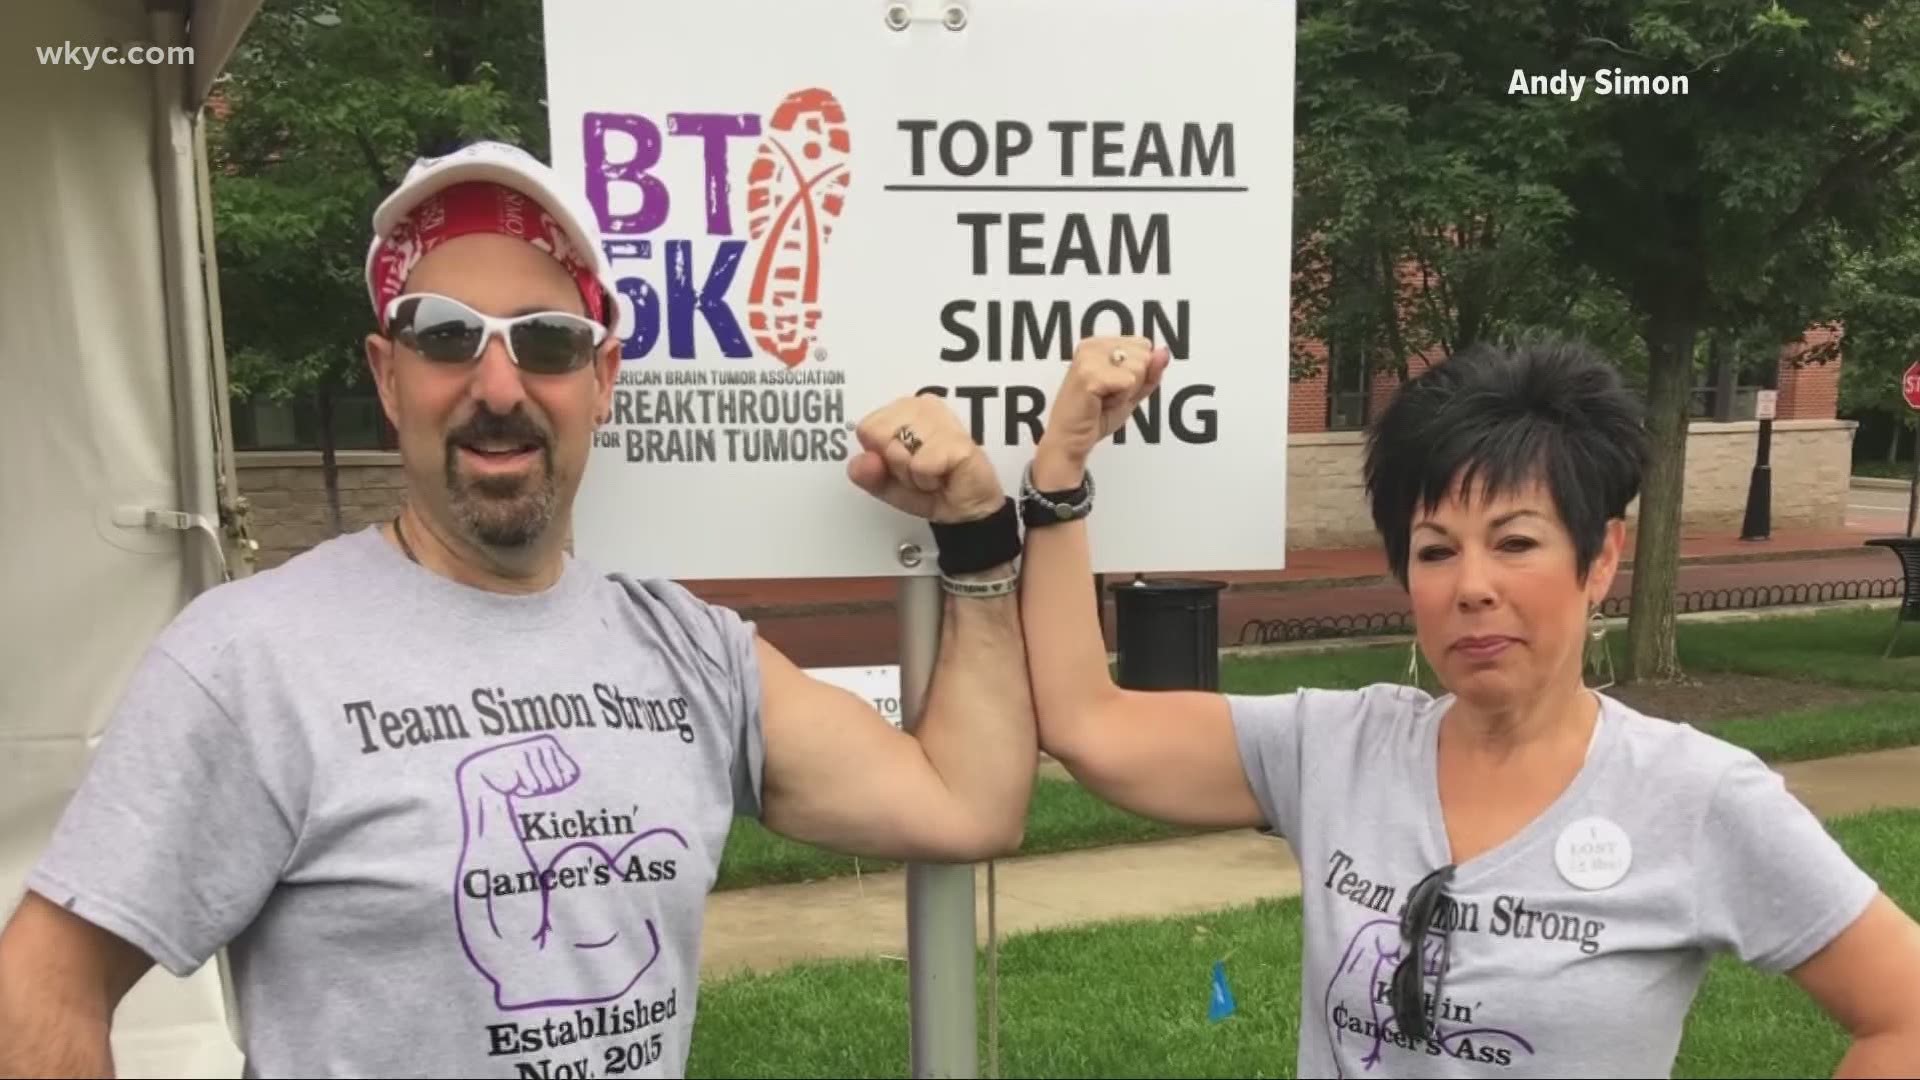 It's said to be ‘one of the deadliest and most challenging forms of cancer to treat,' yet Andy Simon keeps beating the odds. Tiffany Tarpley has more.